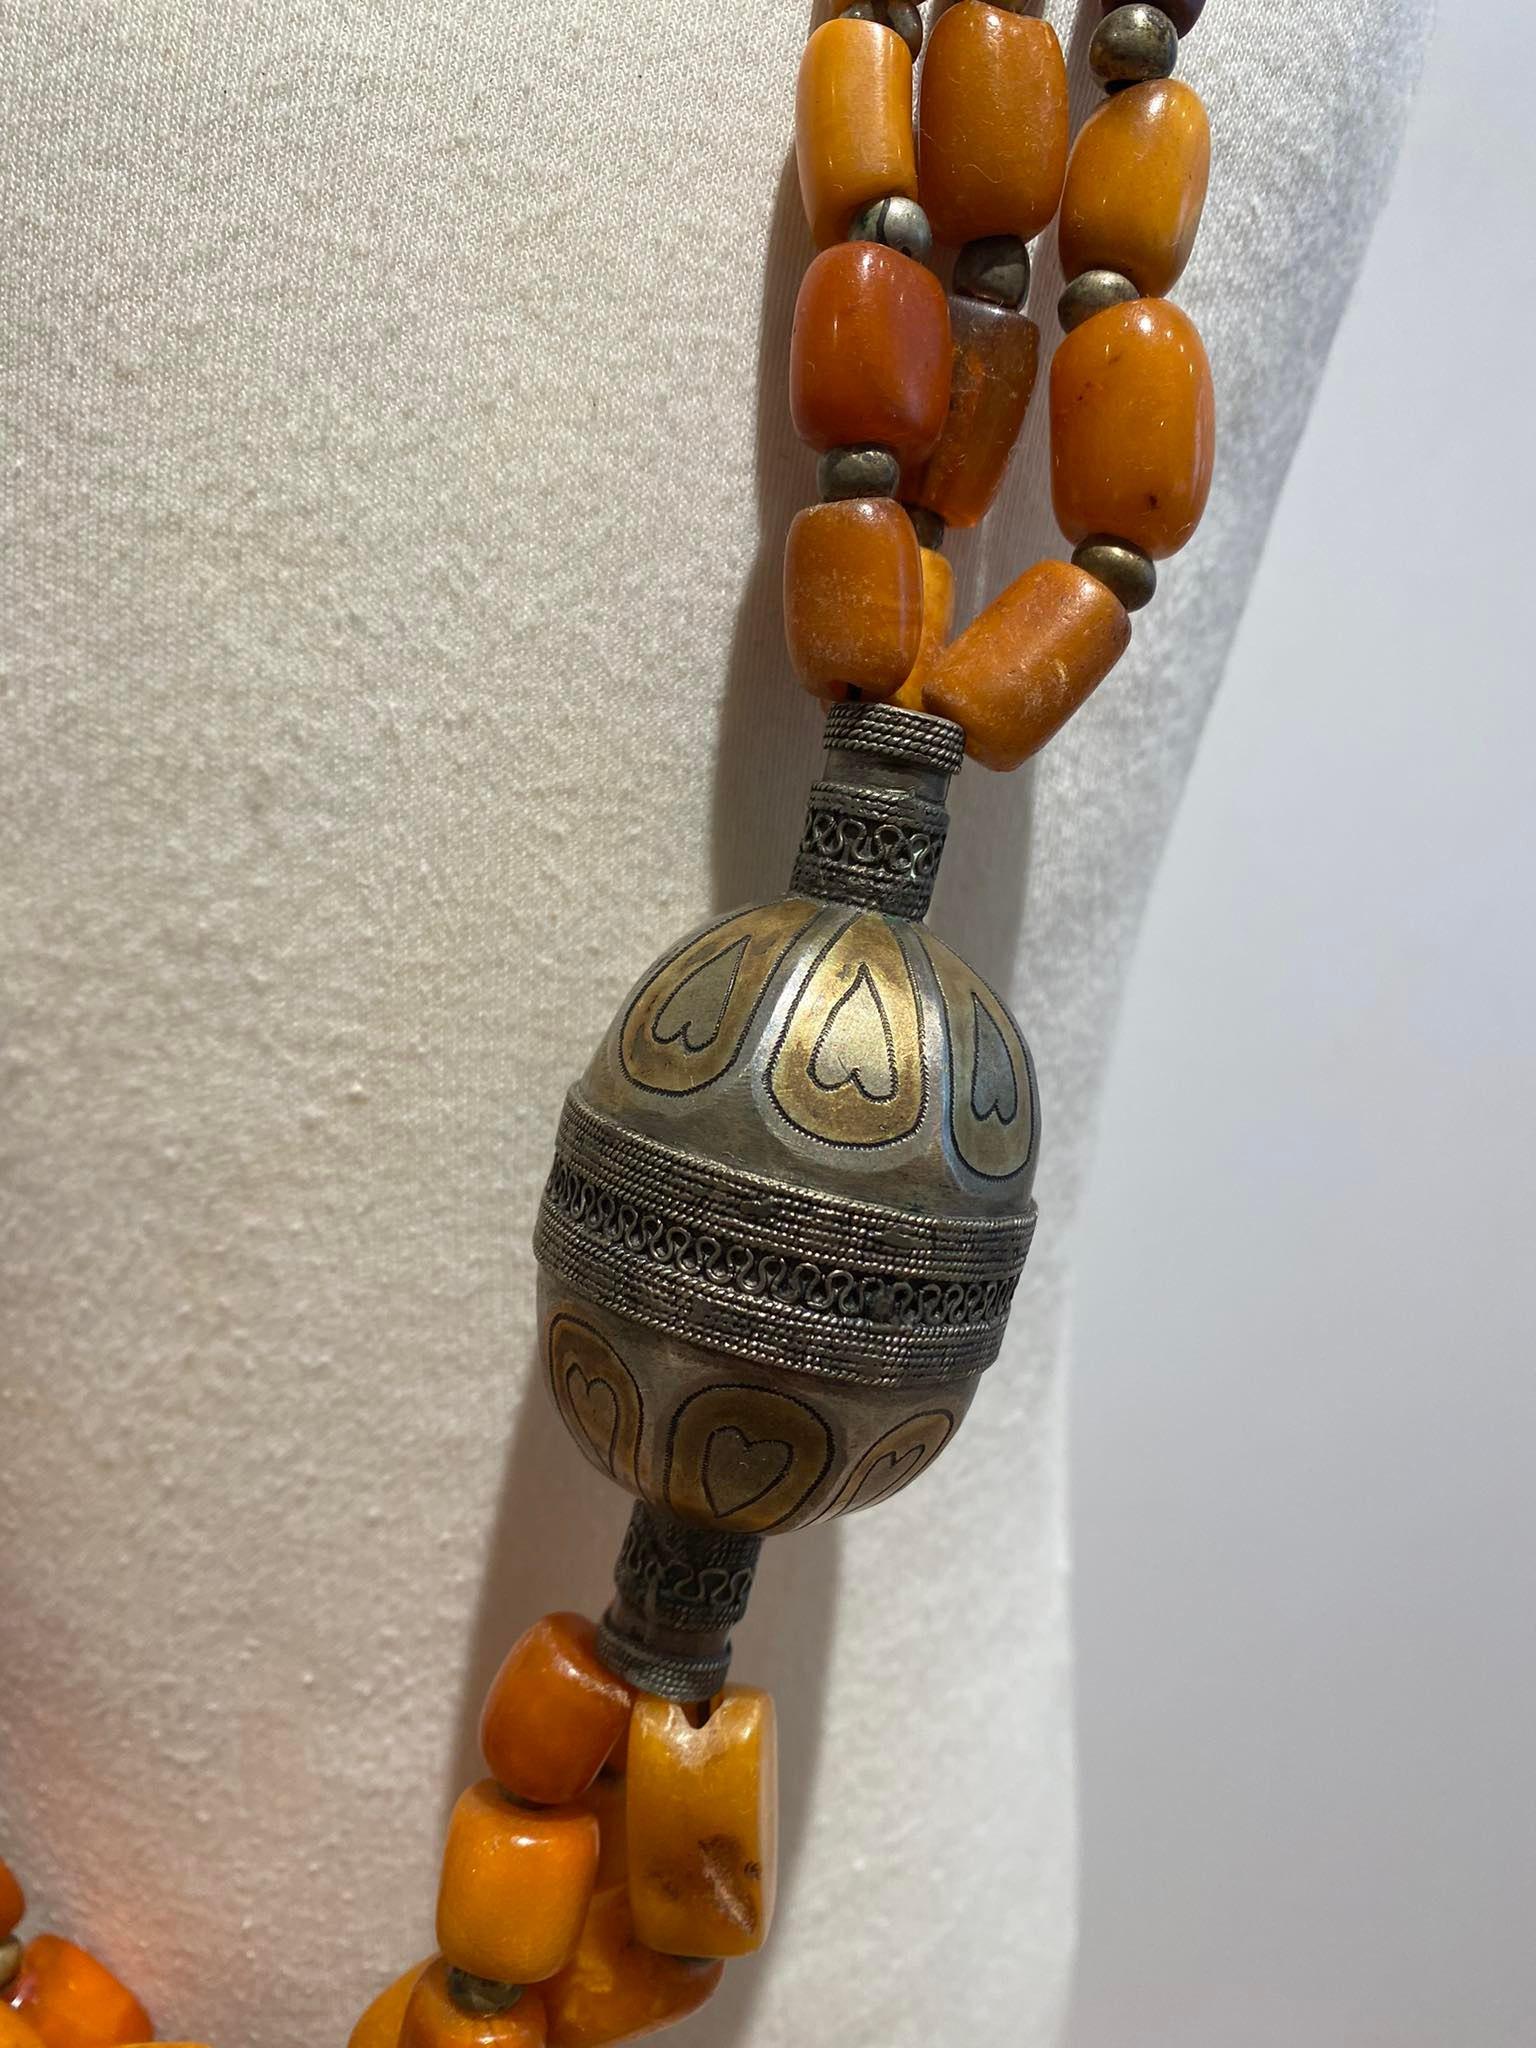  Antique Amber Necklace Yemen Afghanistan 18/19th Century Islamic Art silver  For Sale 2